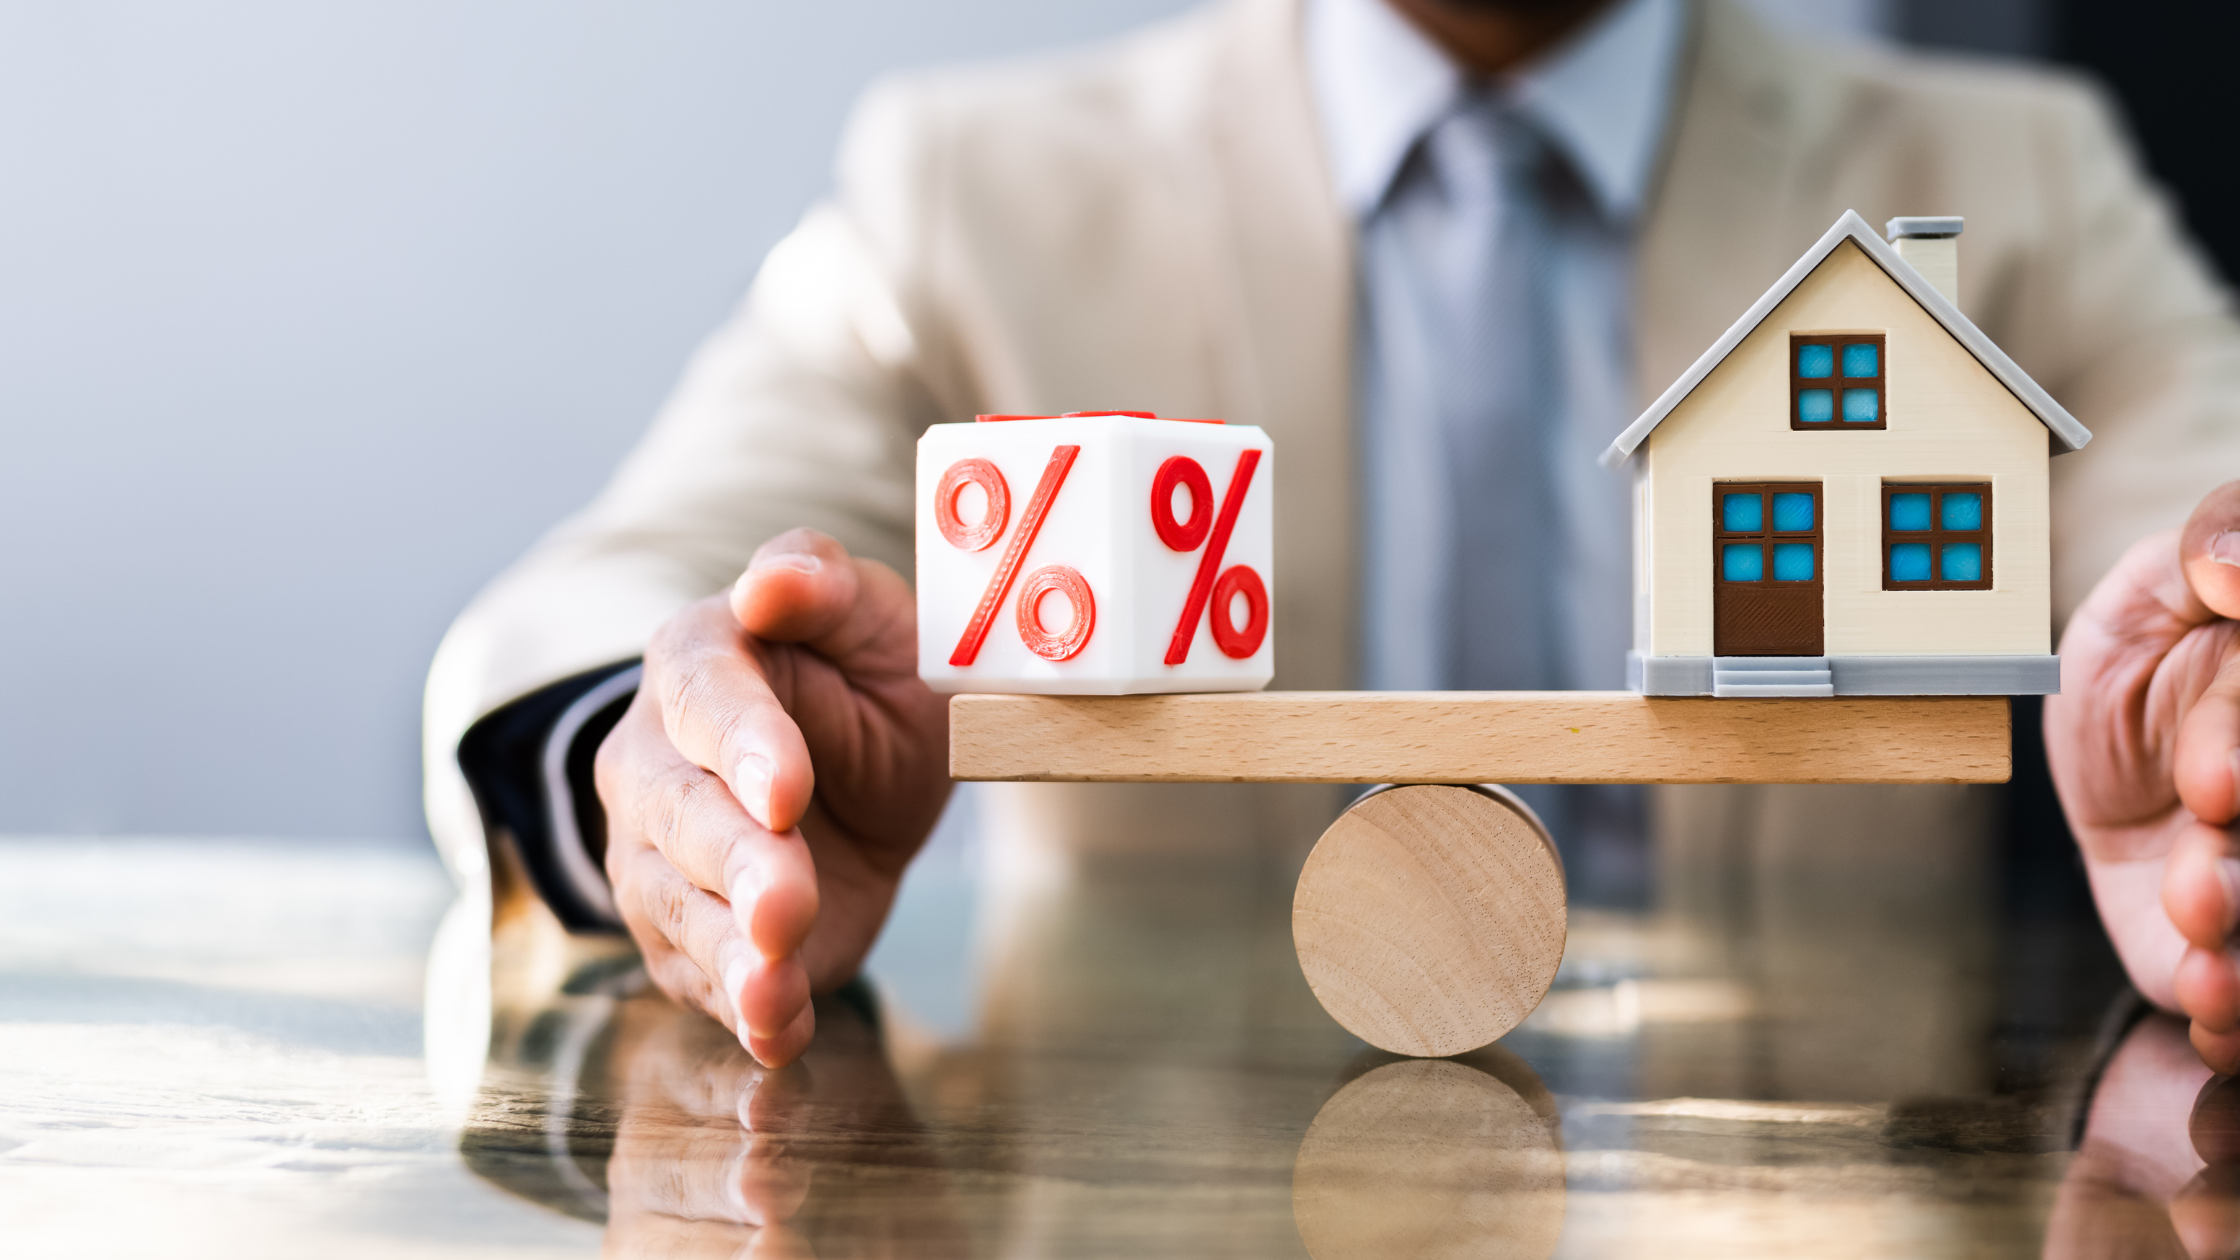 Strategies for Physicians Dealing with High Interest Rates on Home Loans